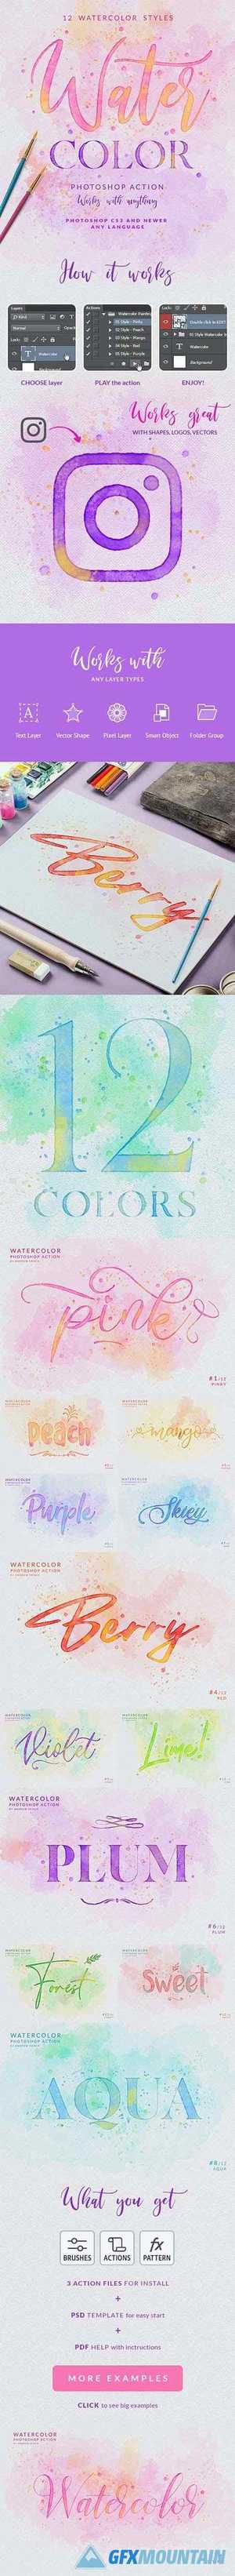 Watercolor Painting - Photoshop Action 25787736